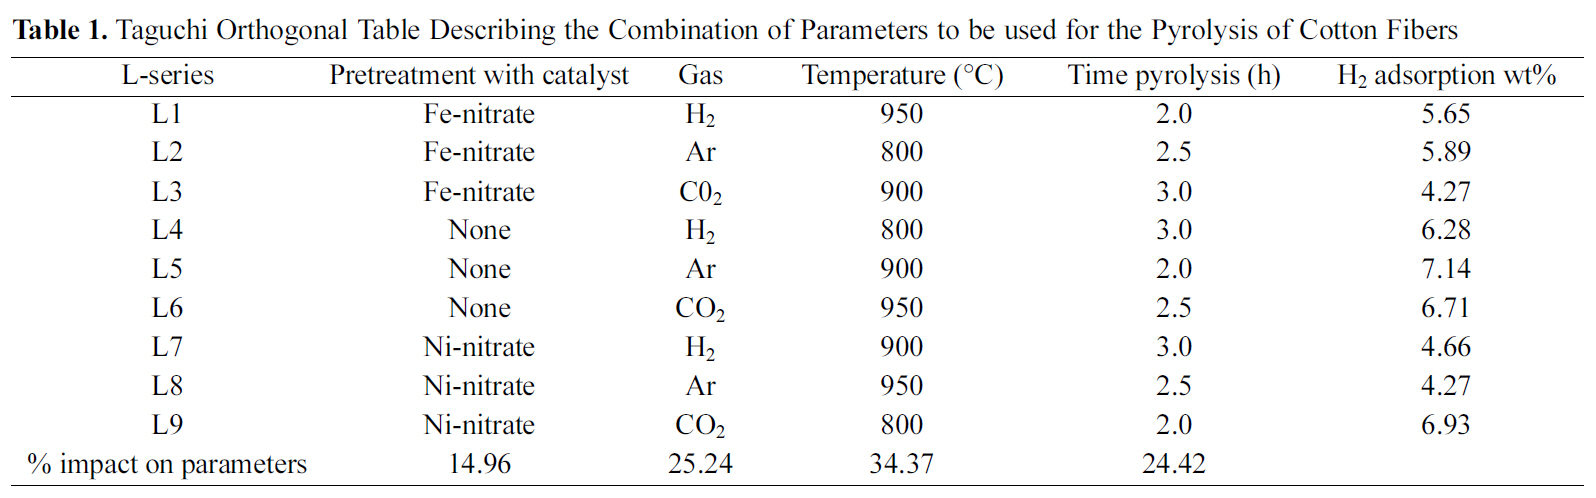 Taguchi Orthogonal Table Describing the Combination of Parameters to be used for the Pyrolysis of Cotton Fibers